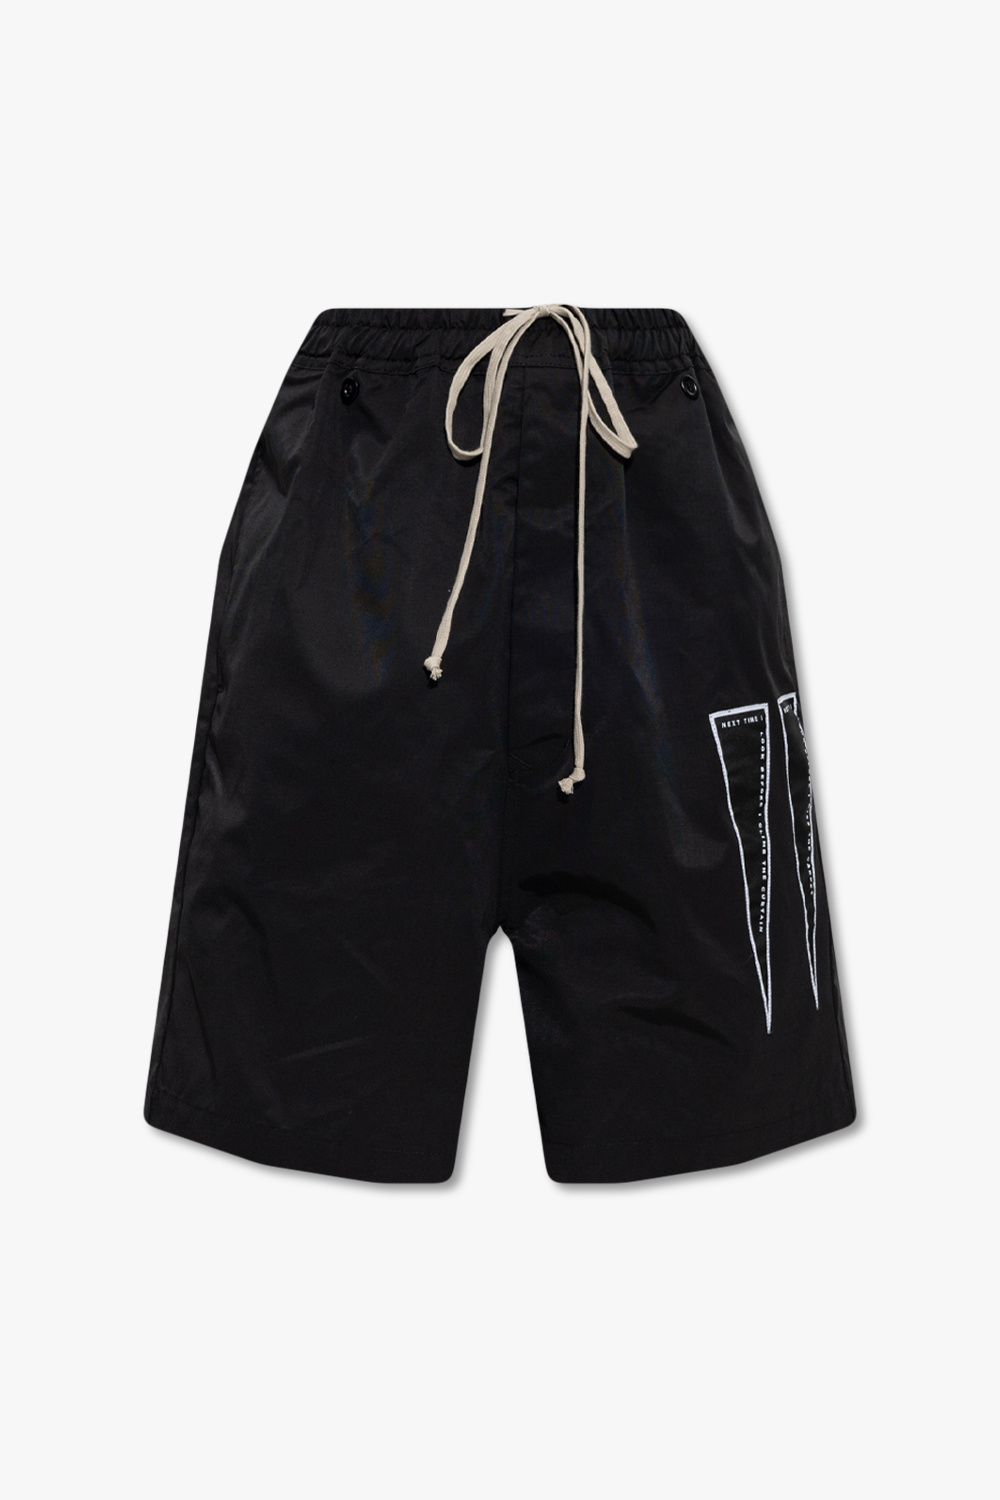 Rick Owens DRKSHDW Patched shorts